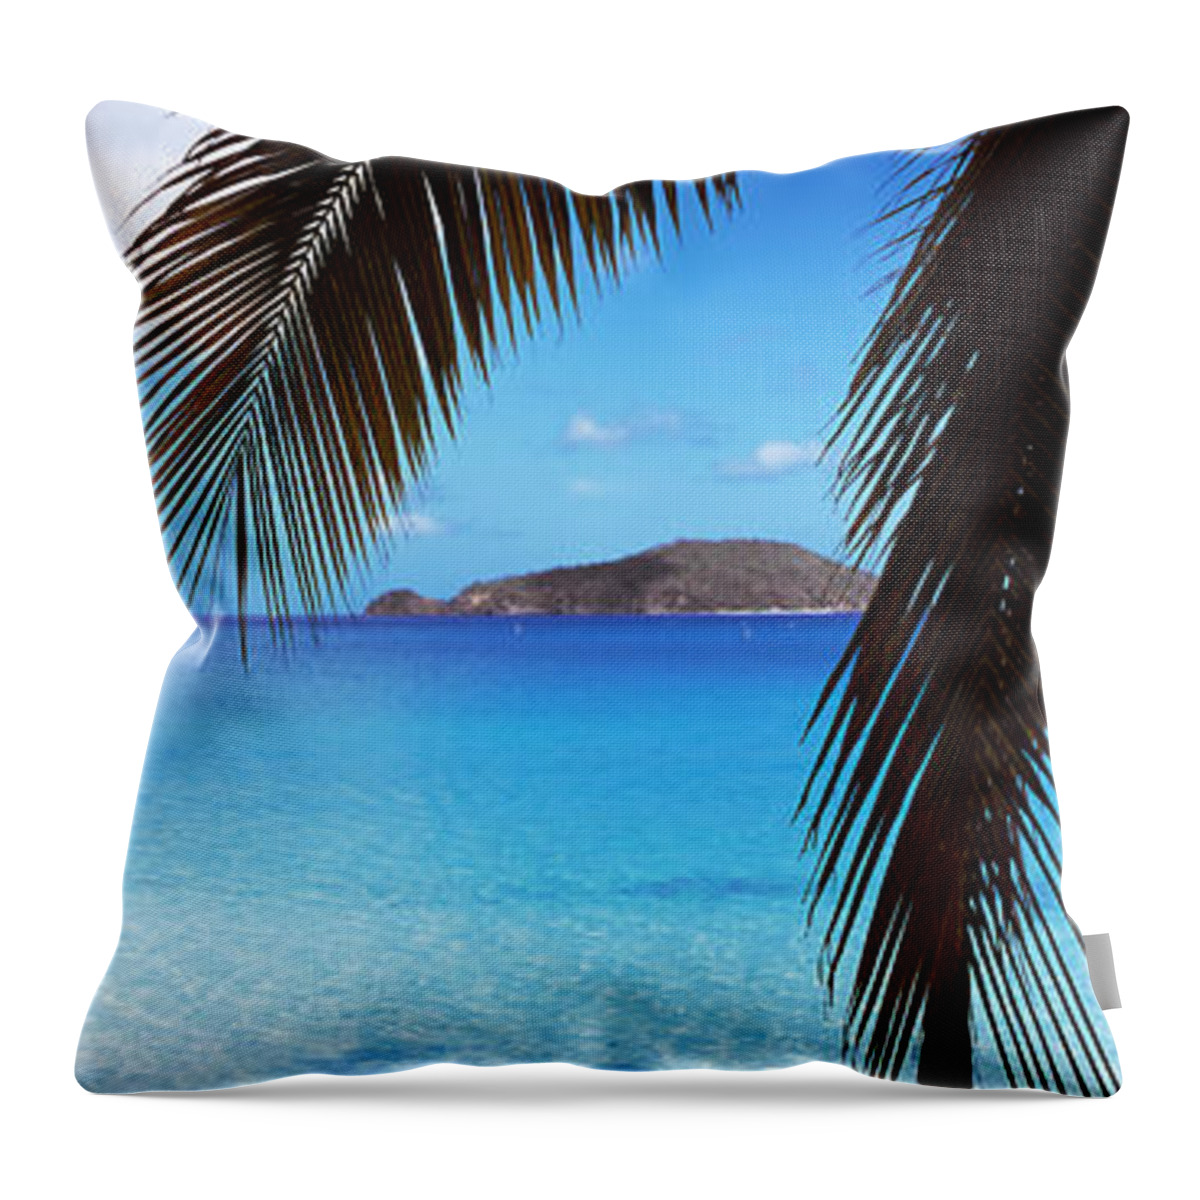 Photography Throw Pillow featuring the photograph Palm Tree On The Beach, Maho Bay by Panoramic Images